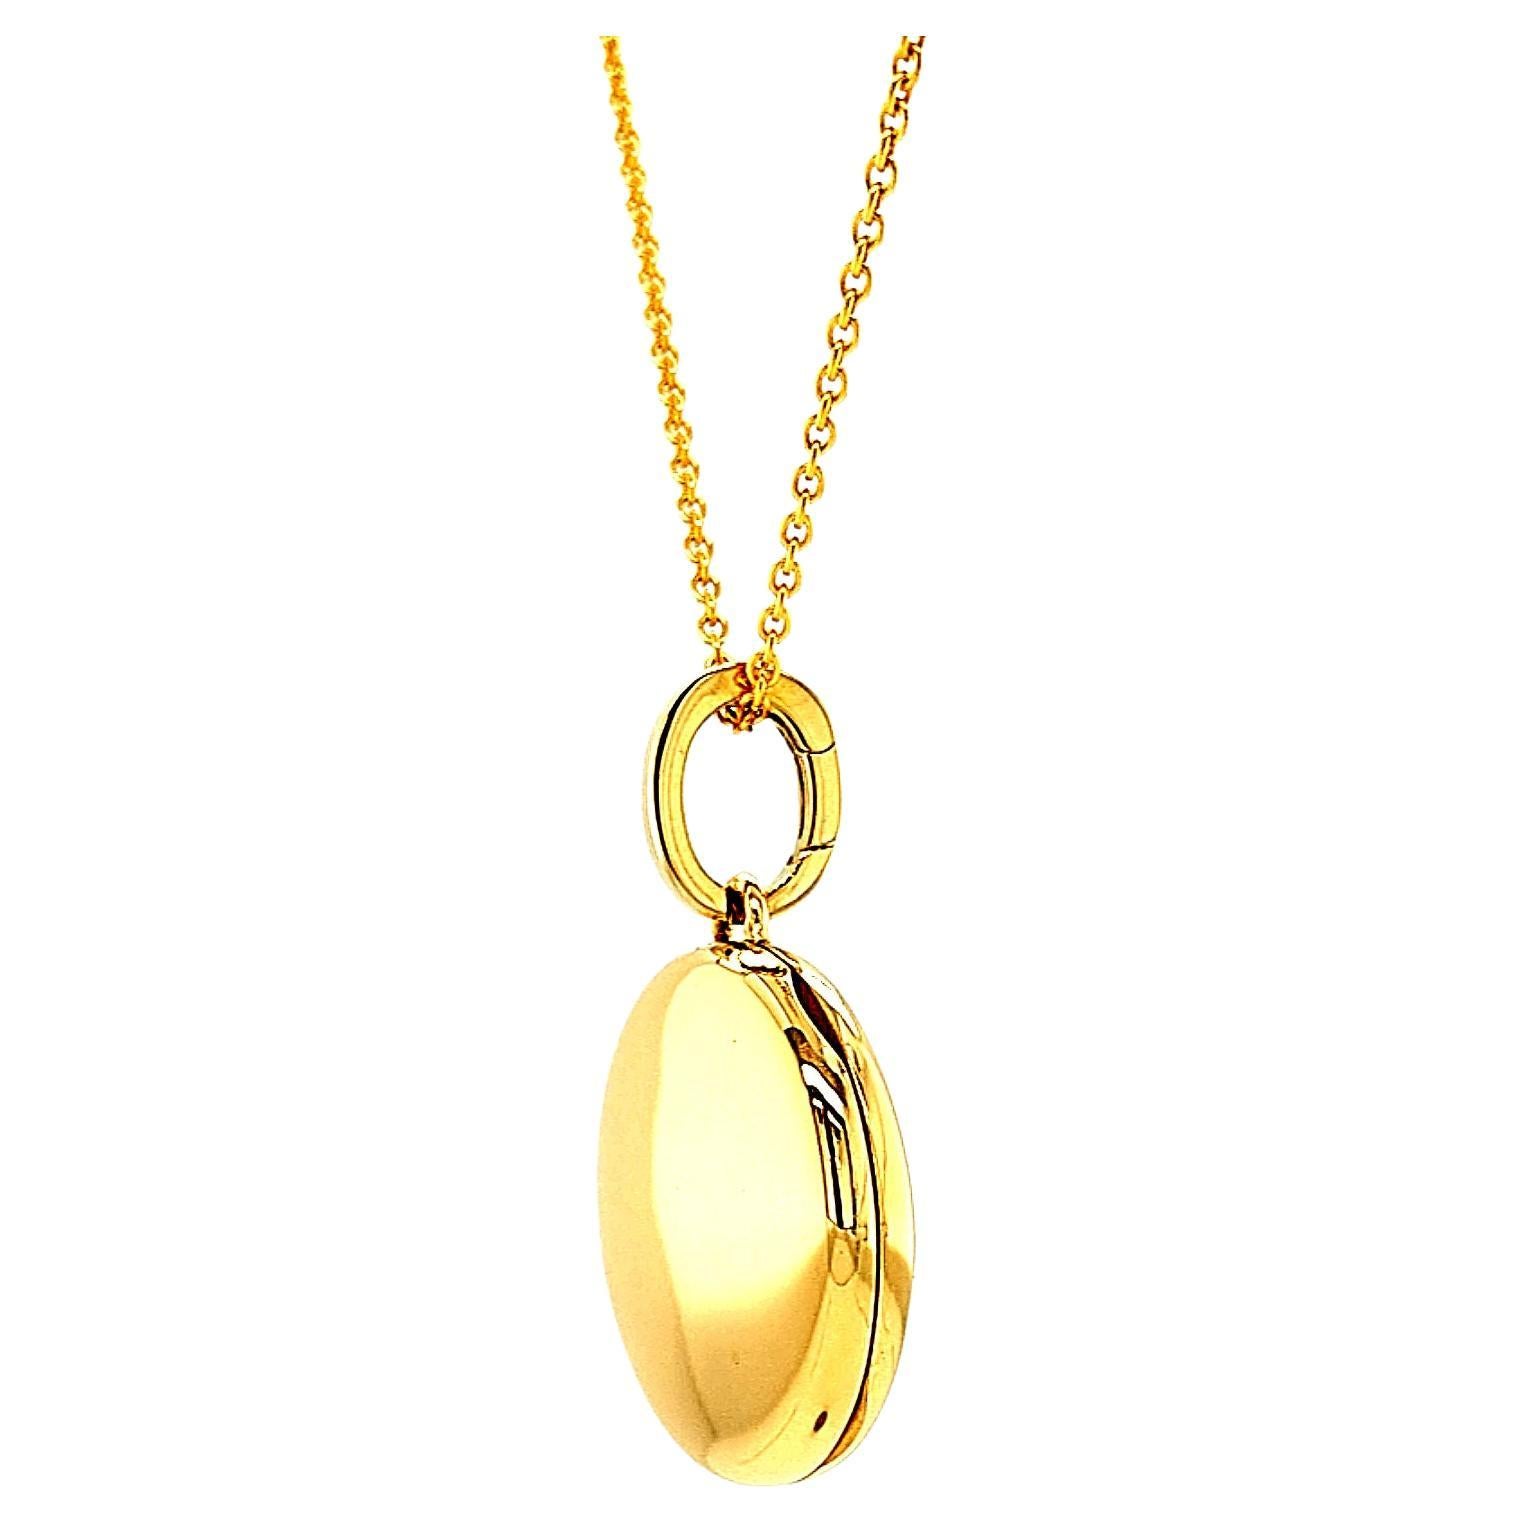 Customizable Round Polished Pendant Locket - 18k Yellow Gold - Diameter 26.0 mm For Sale